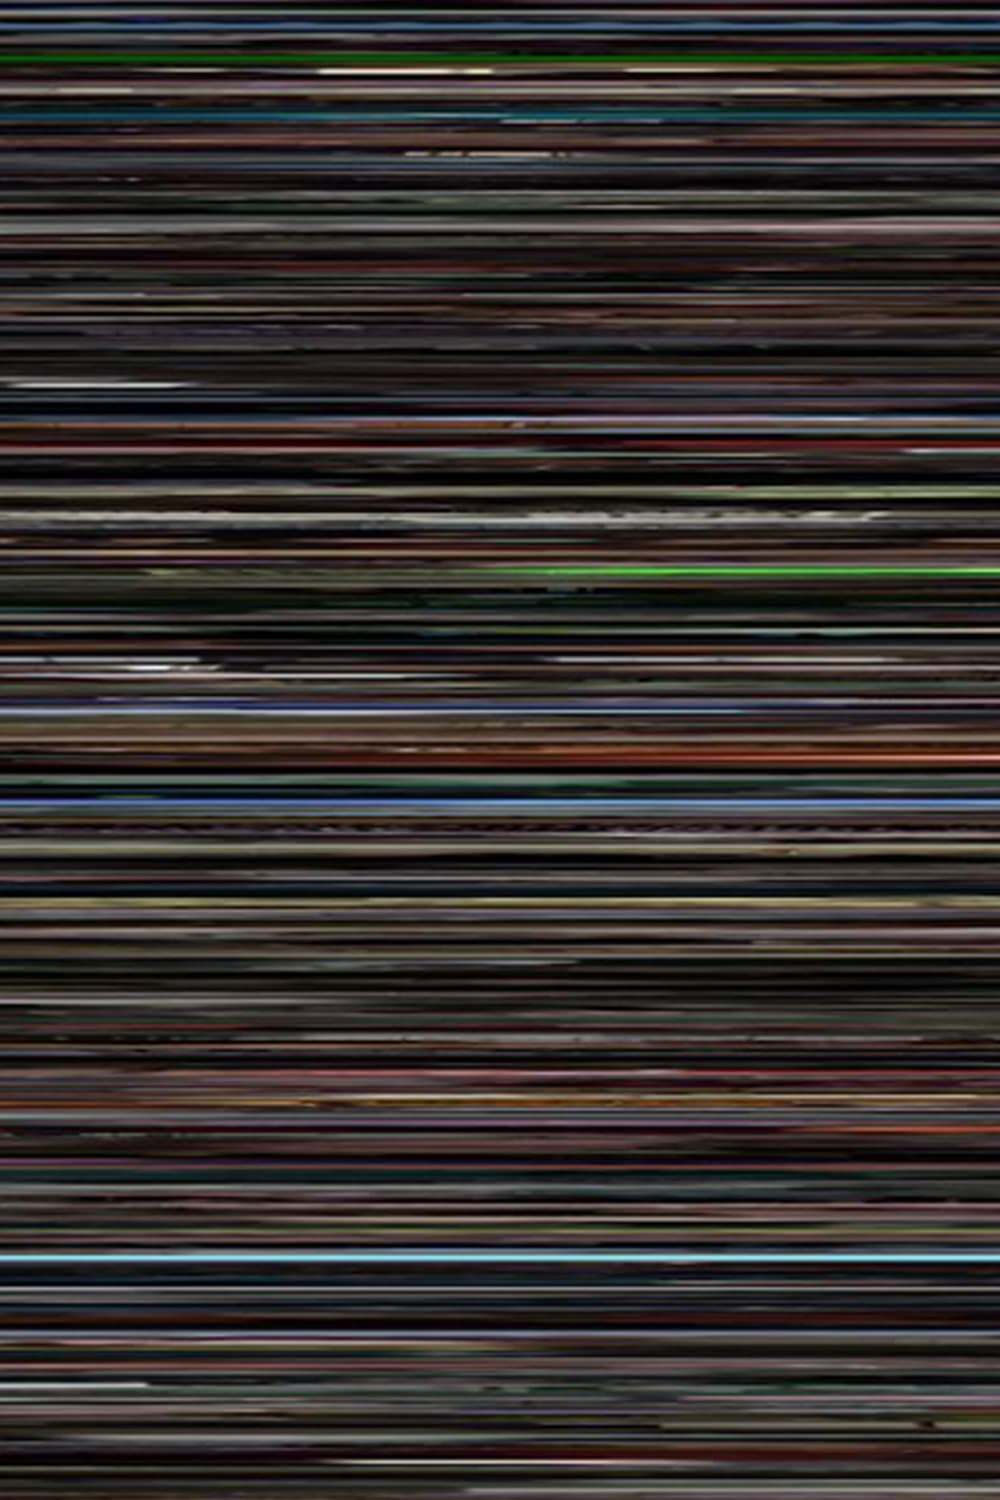 Every Feature Film On My Hard Drive, 3 Pixels Tall and Sped Up 7000%